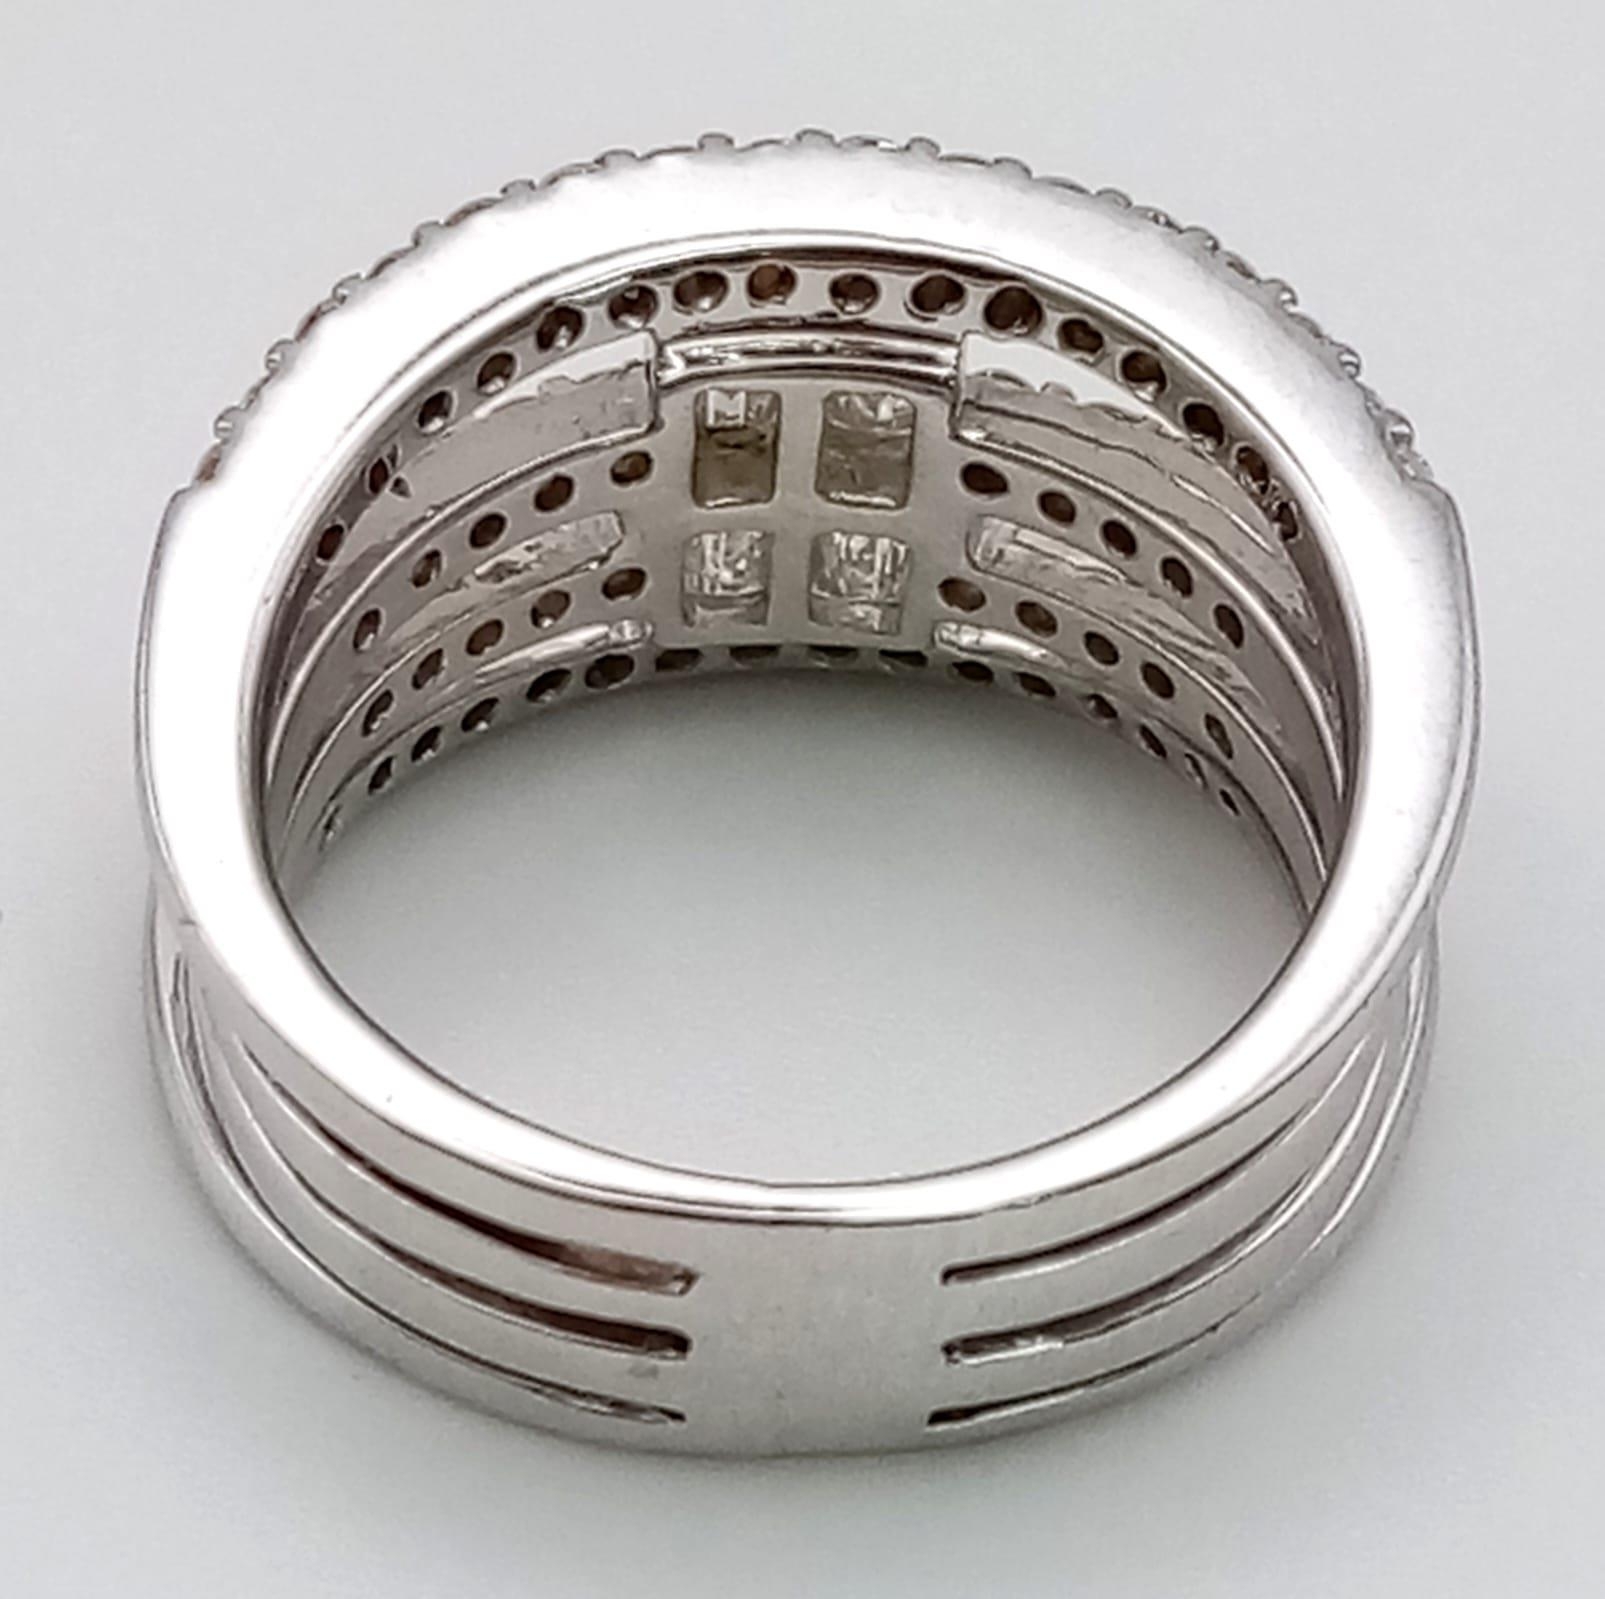 An 18K White Gold 1.4ct Diamond Fancy Cocktail Ring. This is the ultimate in a cocktail stacking - Image 3 of 4